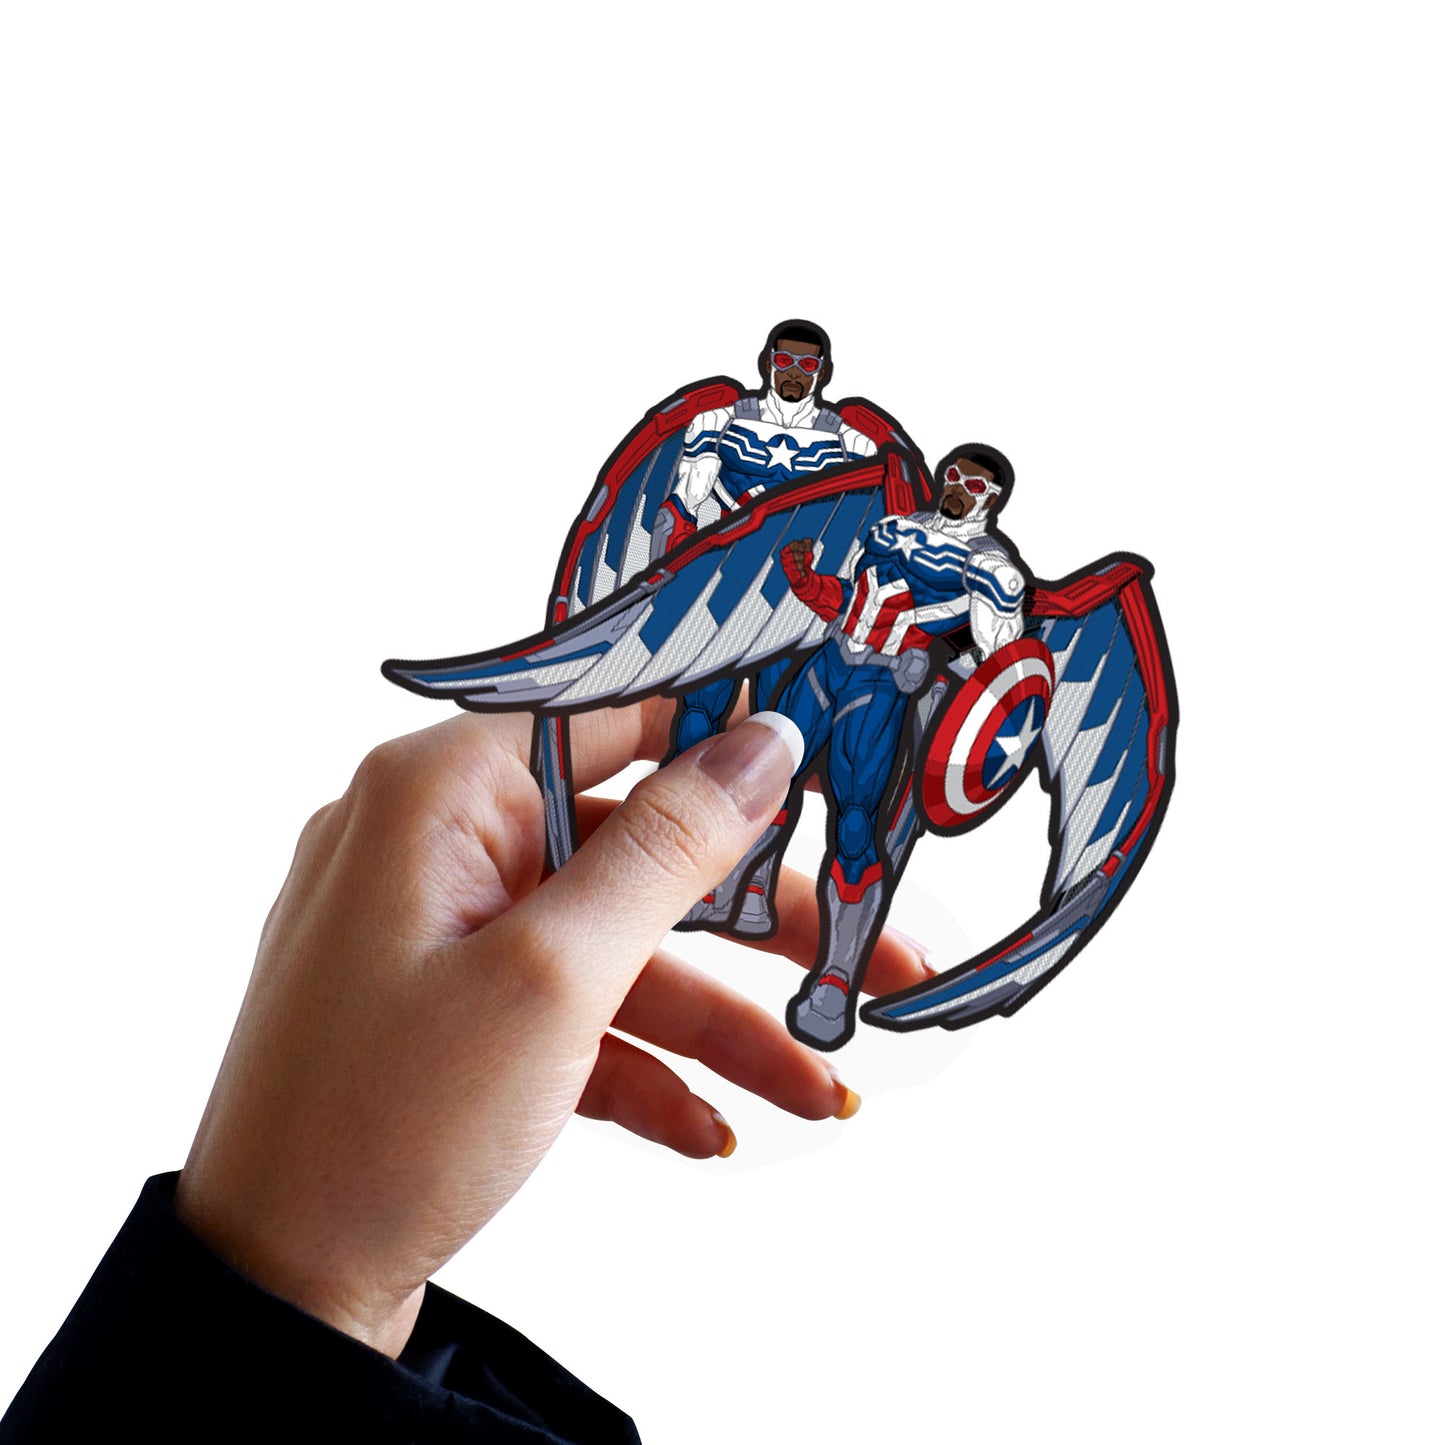 The Shield, Official Marvel Stickers